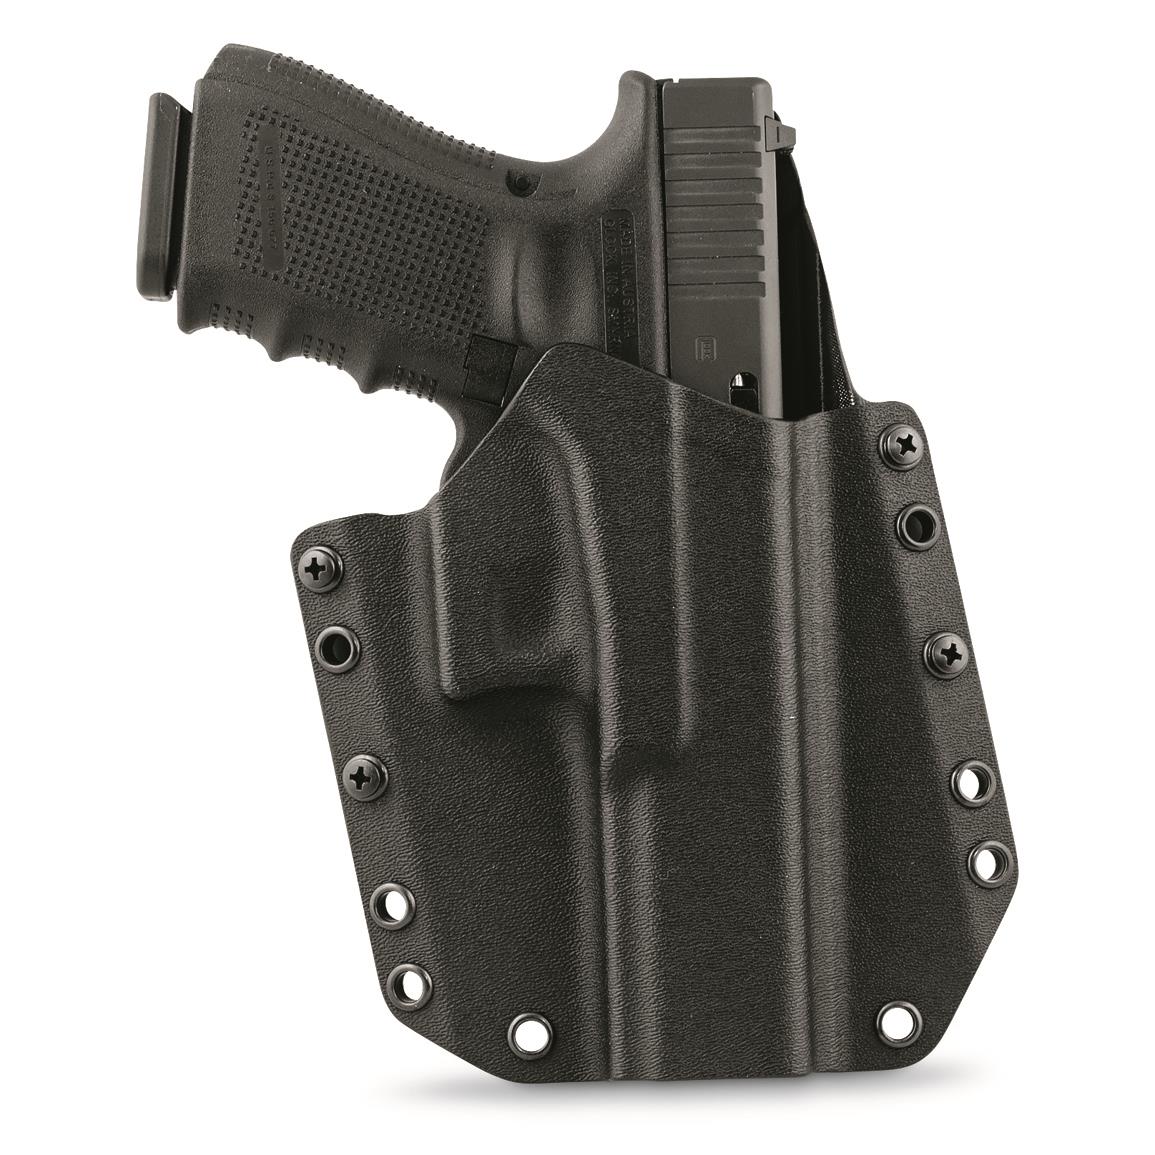 Mission First Tactical OWB Holster, Glock 26/27